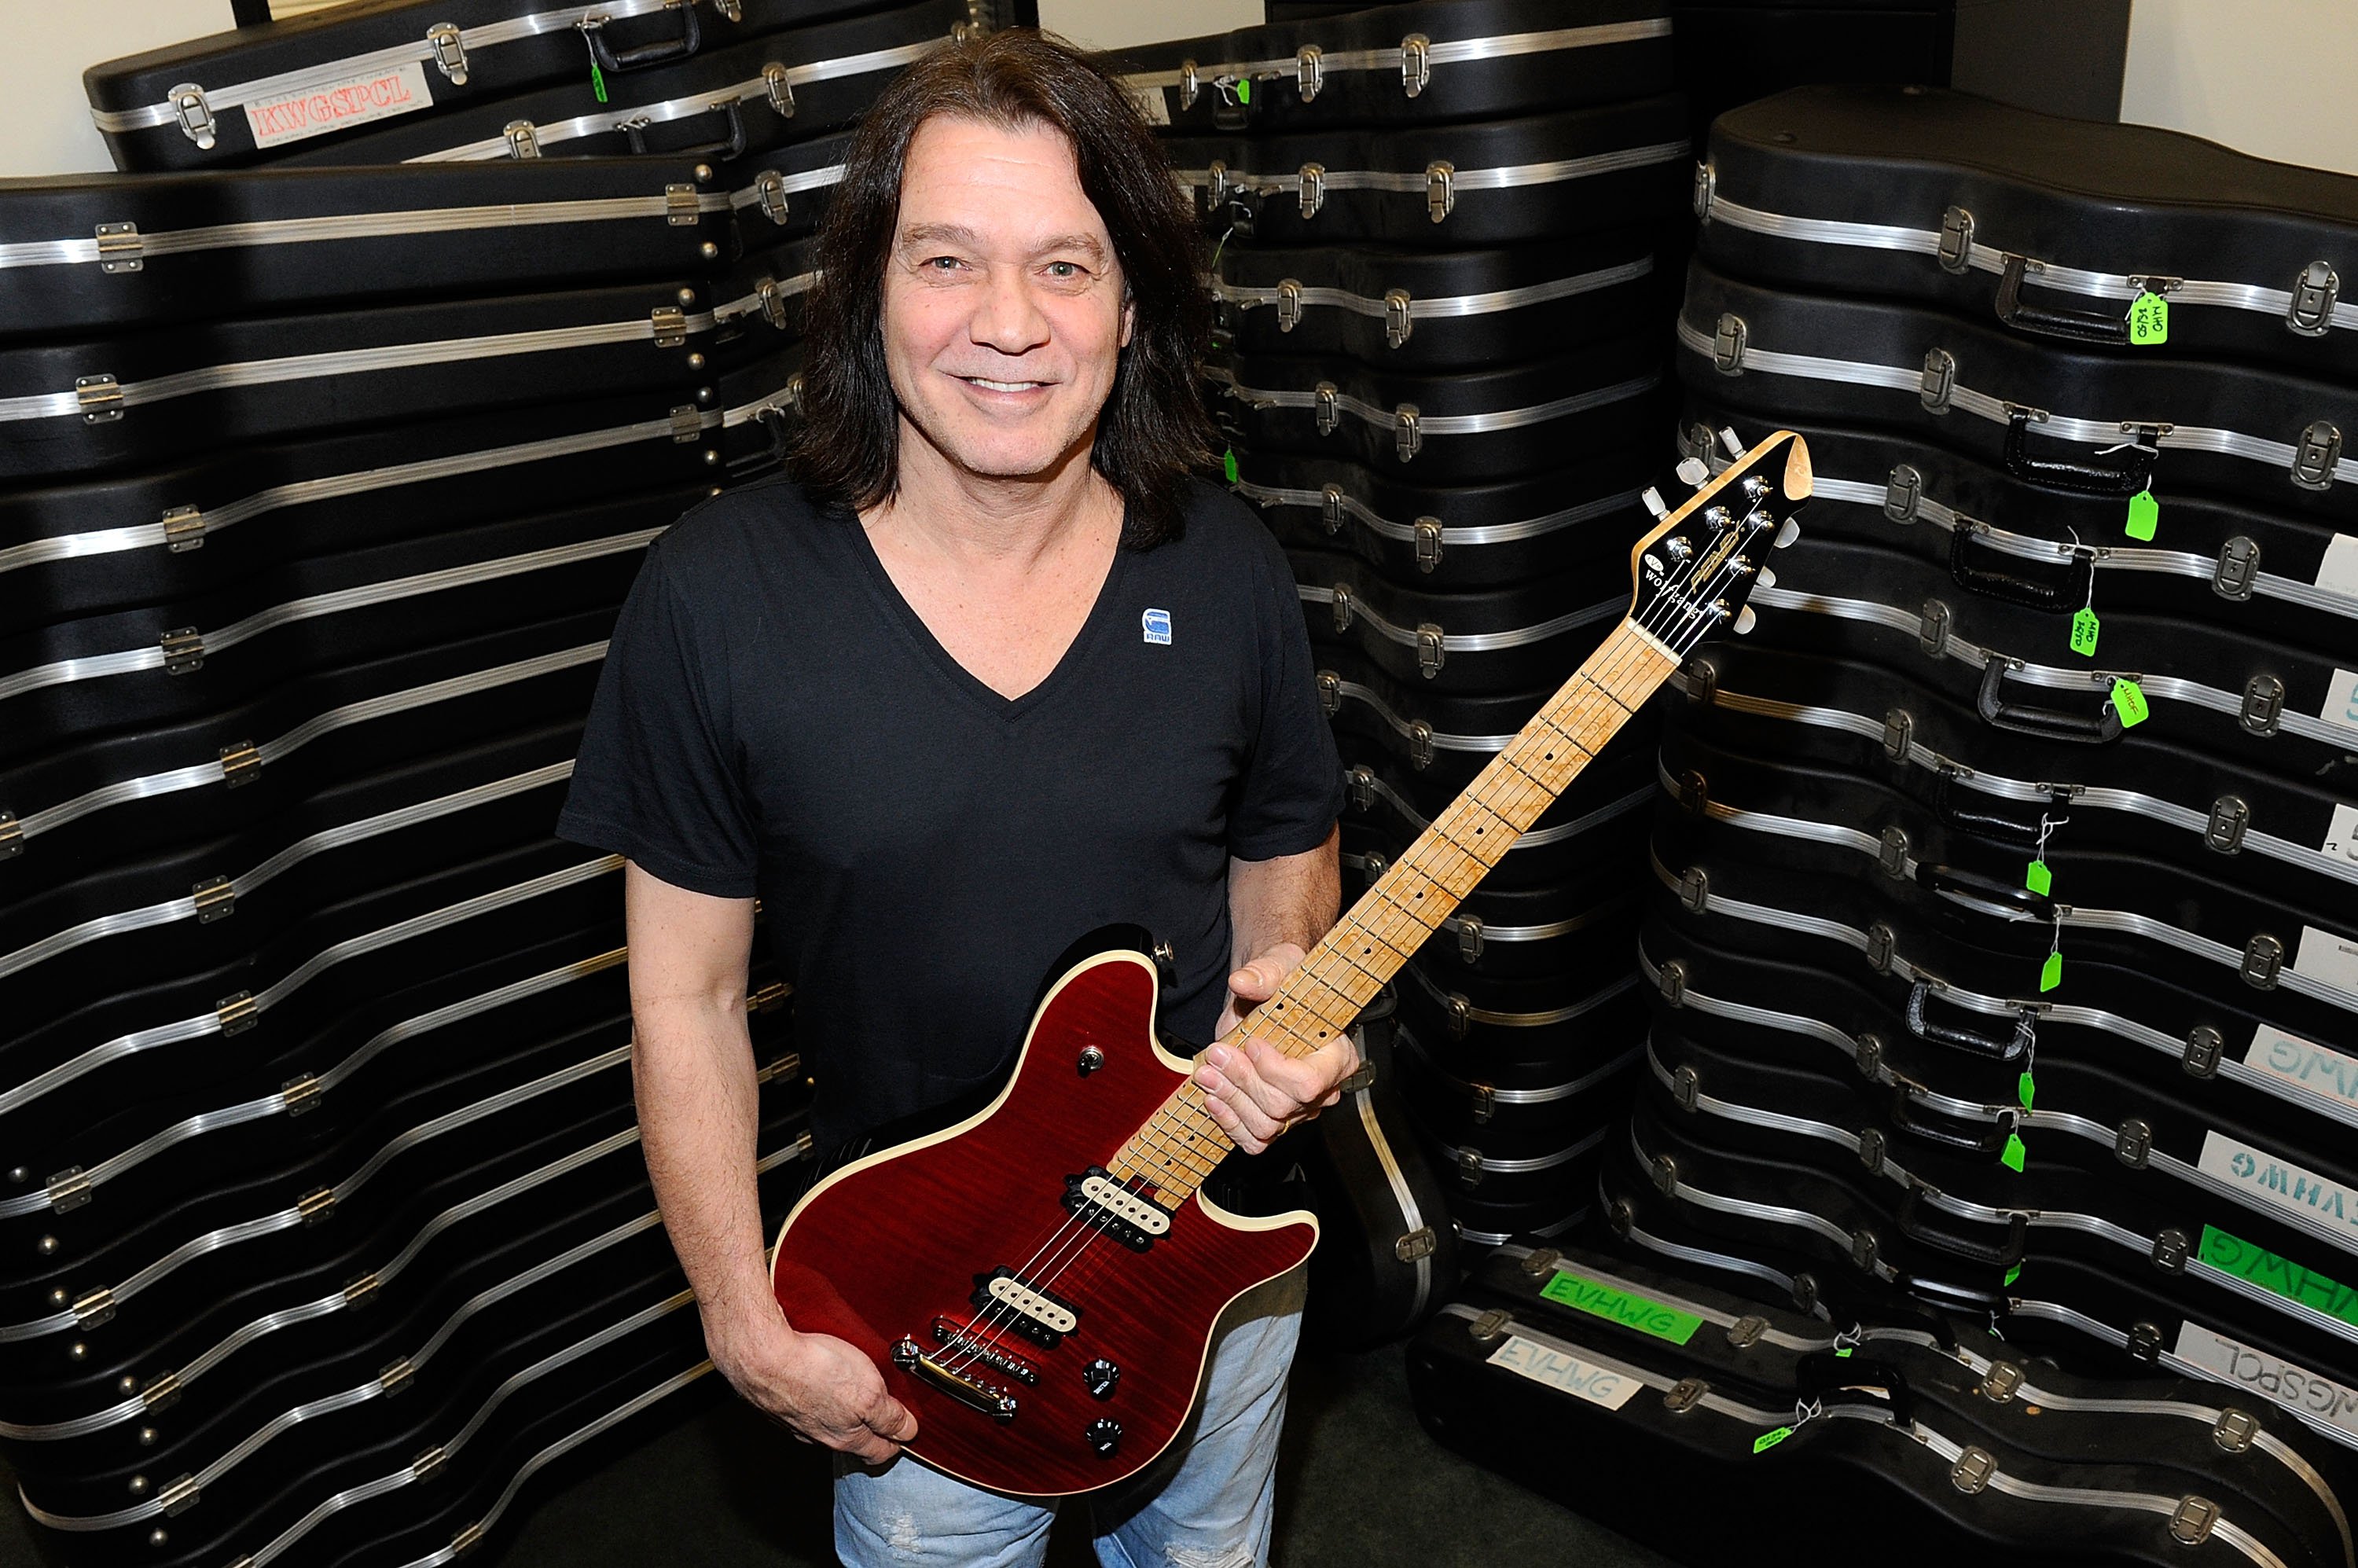 Eddie Van Halen donates 75 electric guitars from his personal collection to The Mr. Holland's Opus Foundation, on January 9, 2012 in Studio City, California | Source: Getty Images